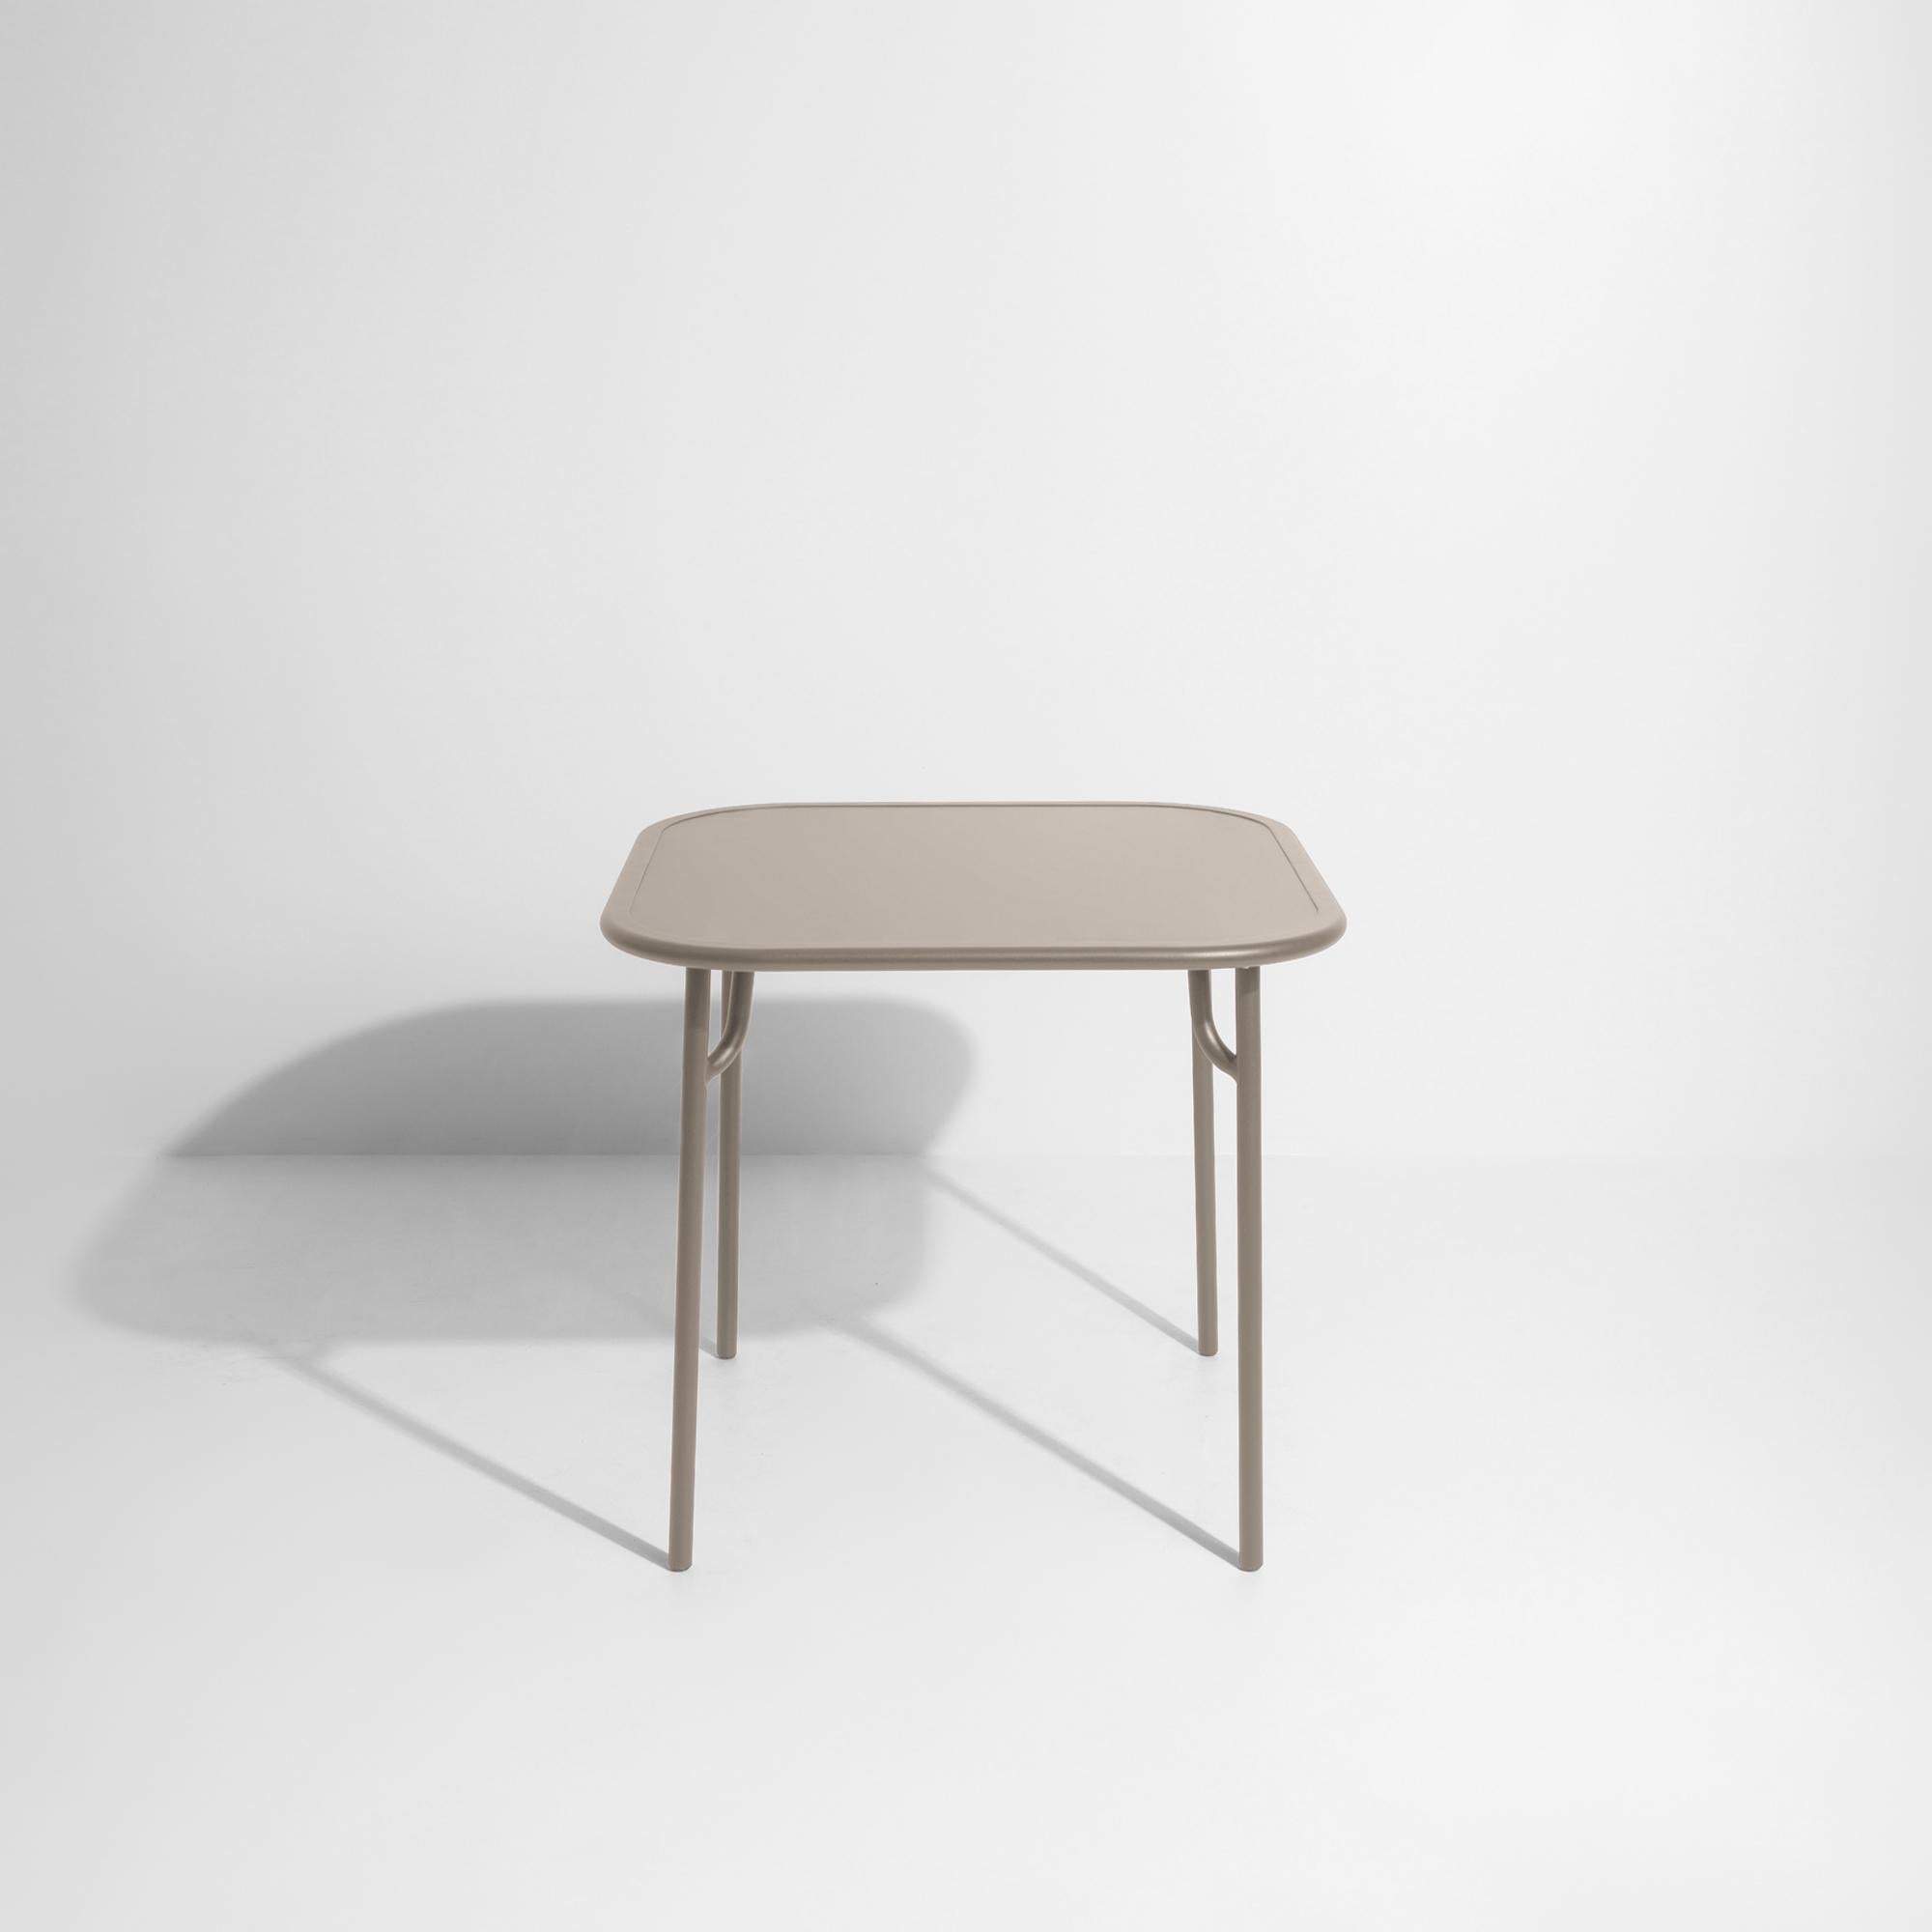 Petite Friture Week-End Plain Square Dining Table in Dune Aluminium by Studio BrichetZiegler, 2017

The week-end collection is a full range of outdoor furniture, in aluminium grained epoxy paint, matt finish, that includes 18 functions and 8